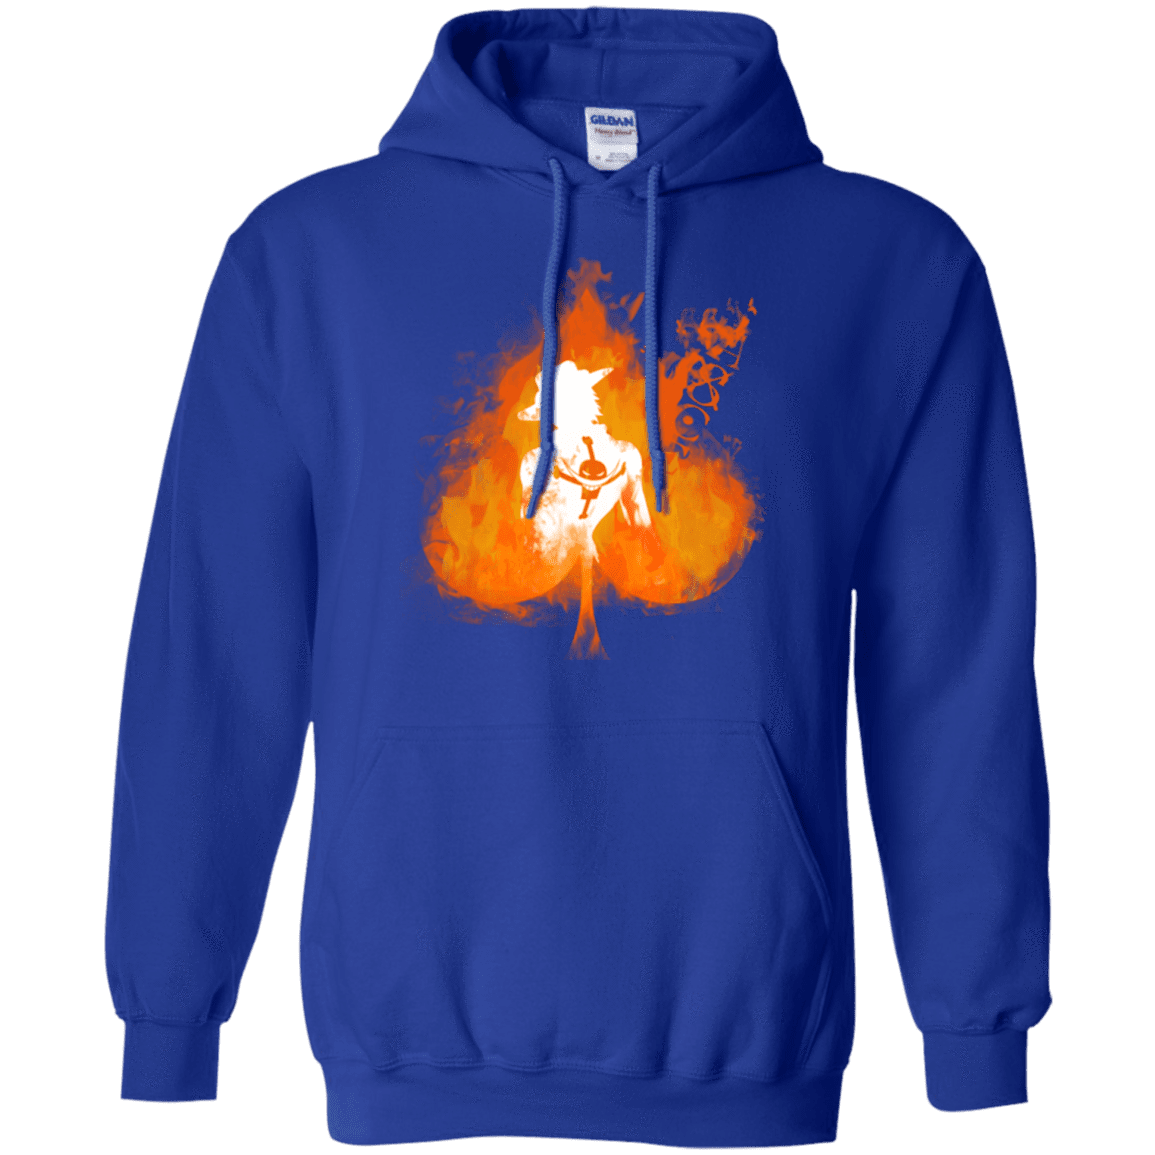 Sweatshirts Royal / Small Ace one piece Pullover Hoodie